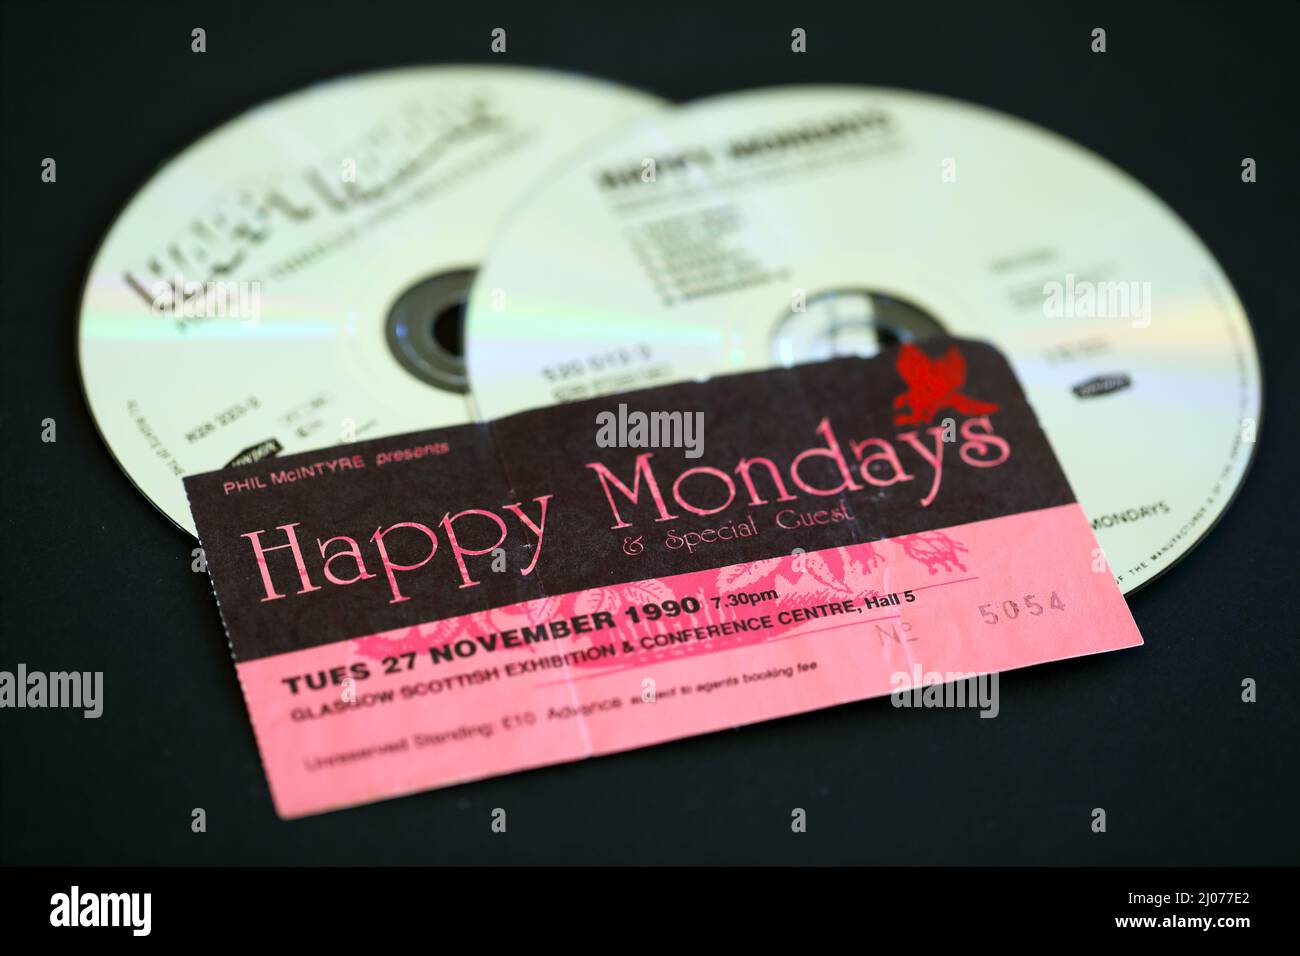 Happy Mondays, the English Rock Band, CD's & Concert Tickets Stock Photo